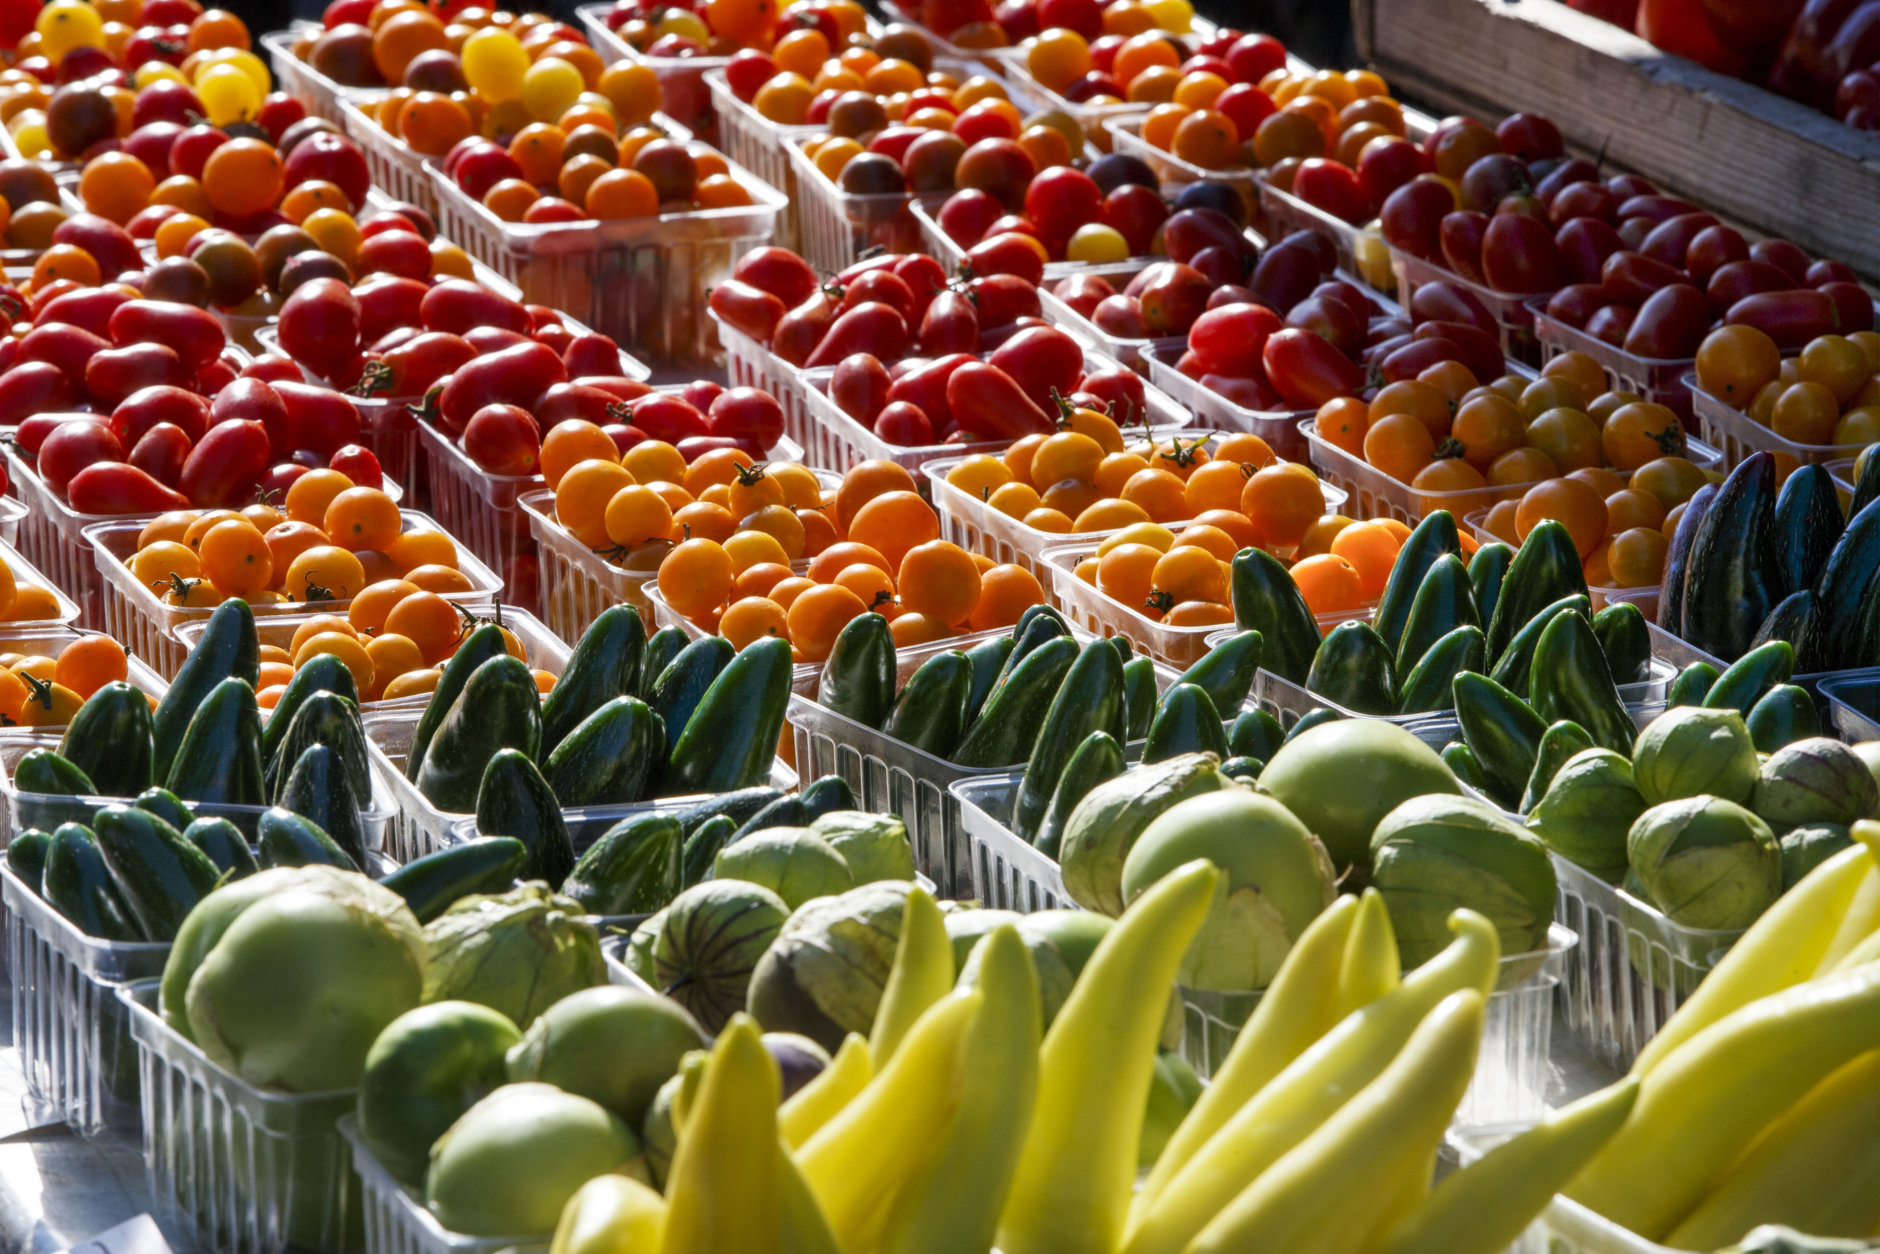 Fresh-picked tomatoes, cucumbers and other summer garden vegetables are displayed for sale at a farmers market in Falls Church, Va., Saturday, Aug. 8, 2015. (AP Photo/J. Scott Applewhite)